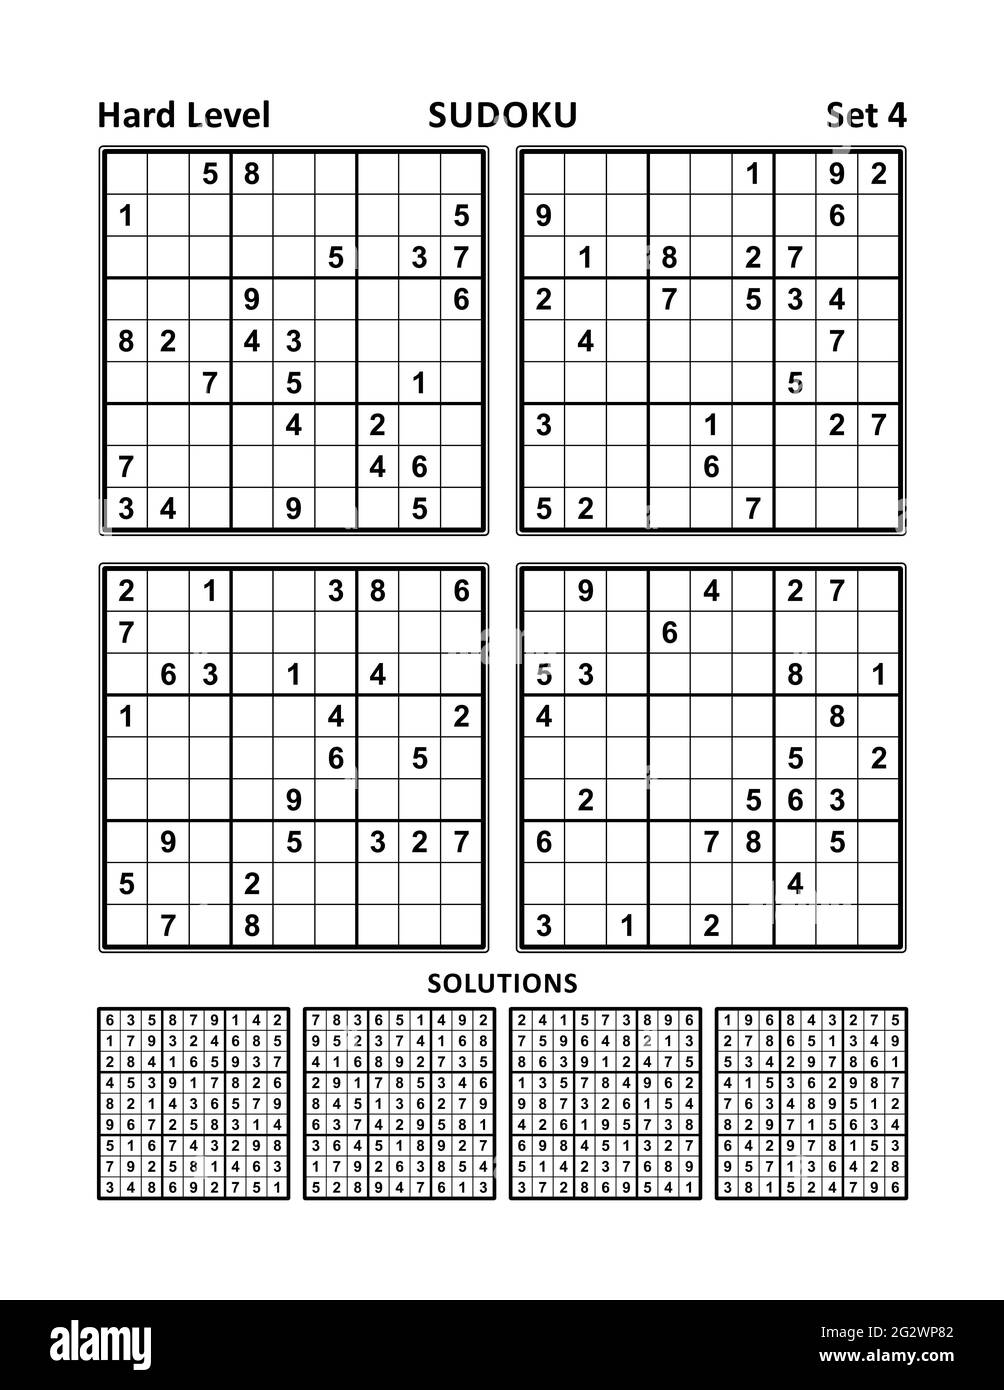 Four sudoku games of hard level, with answers. Set 4. Stock Photo